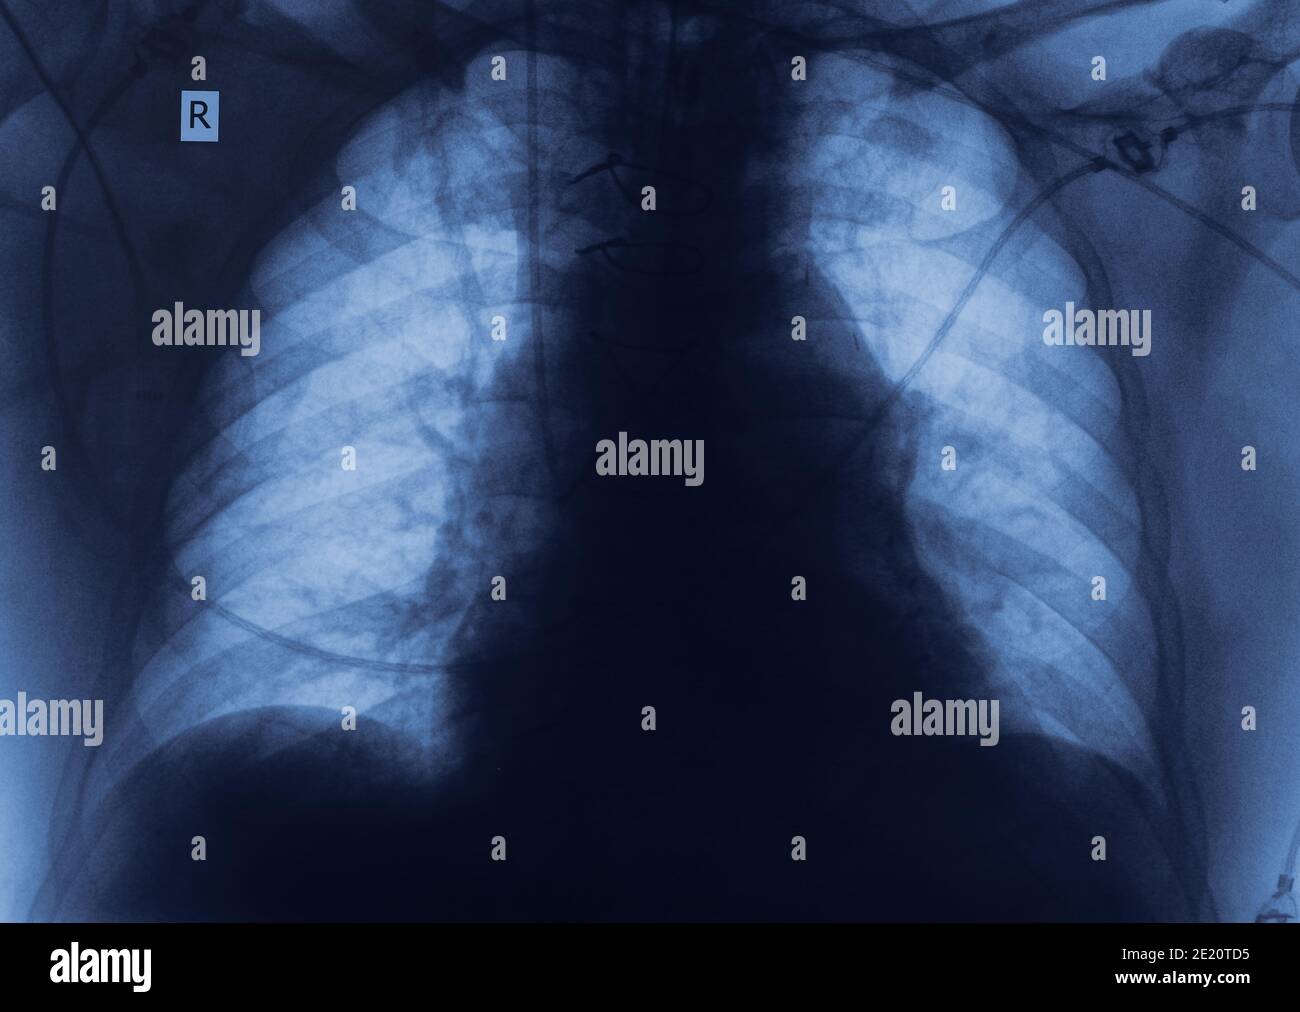 X-ray image with space for your ideas. Stock Photo